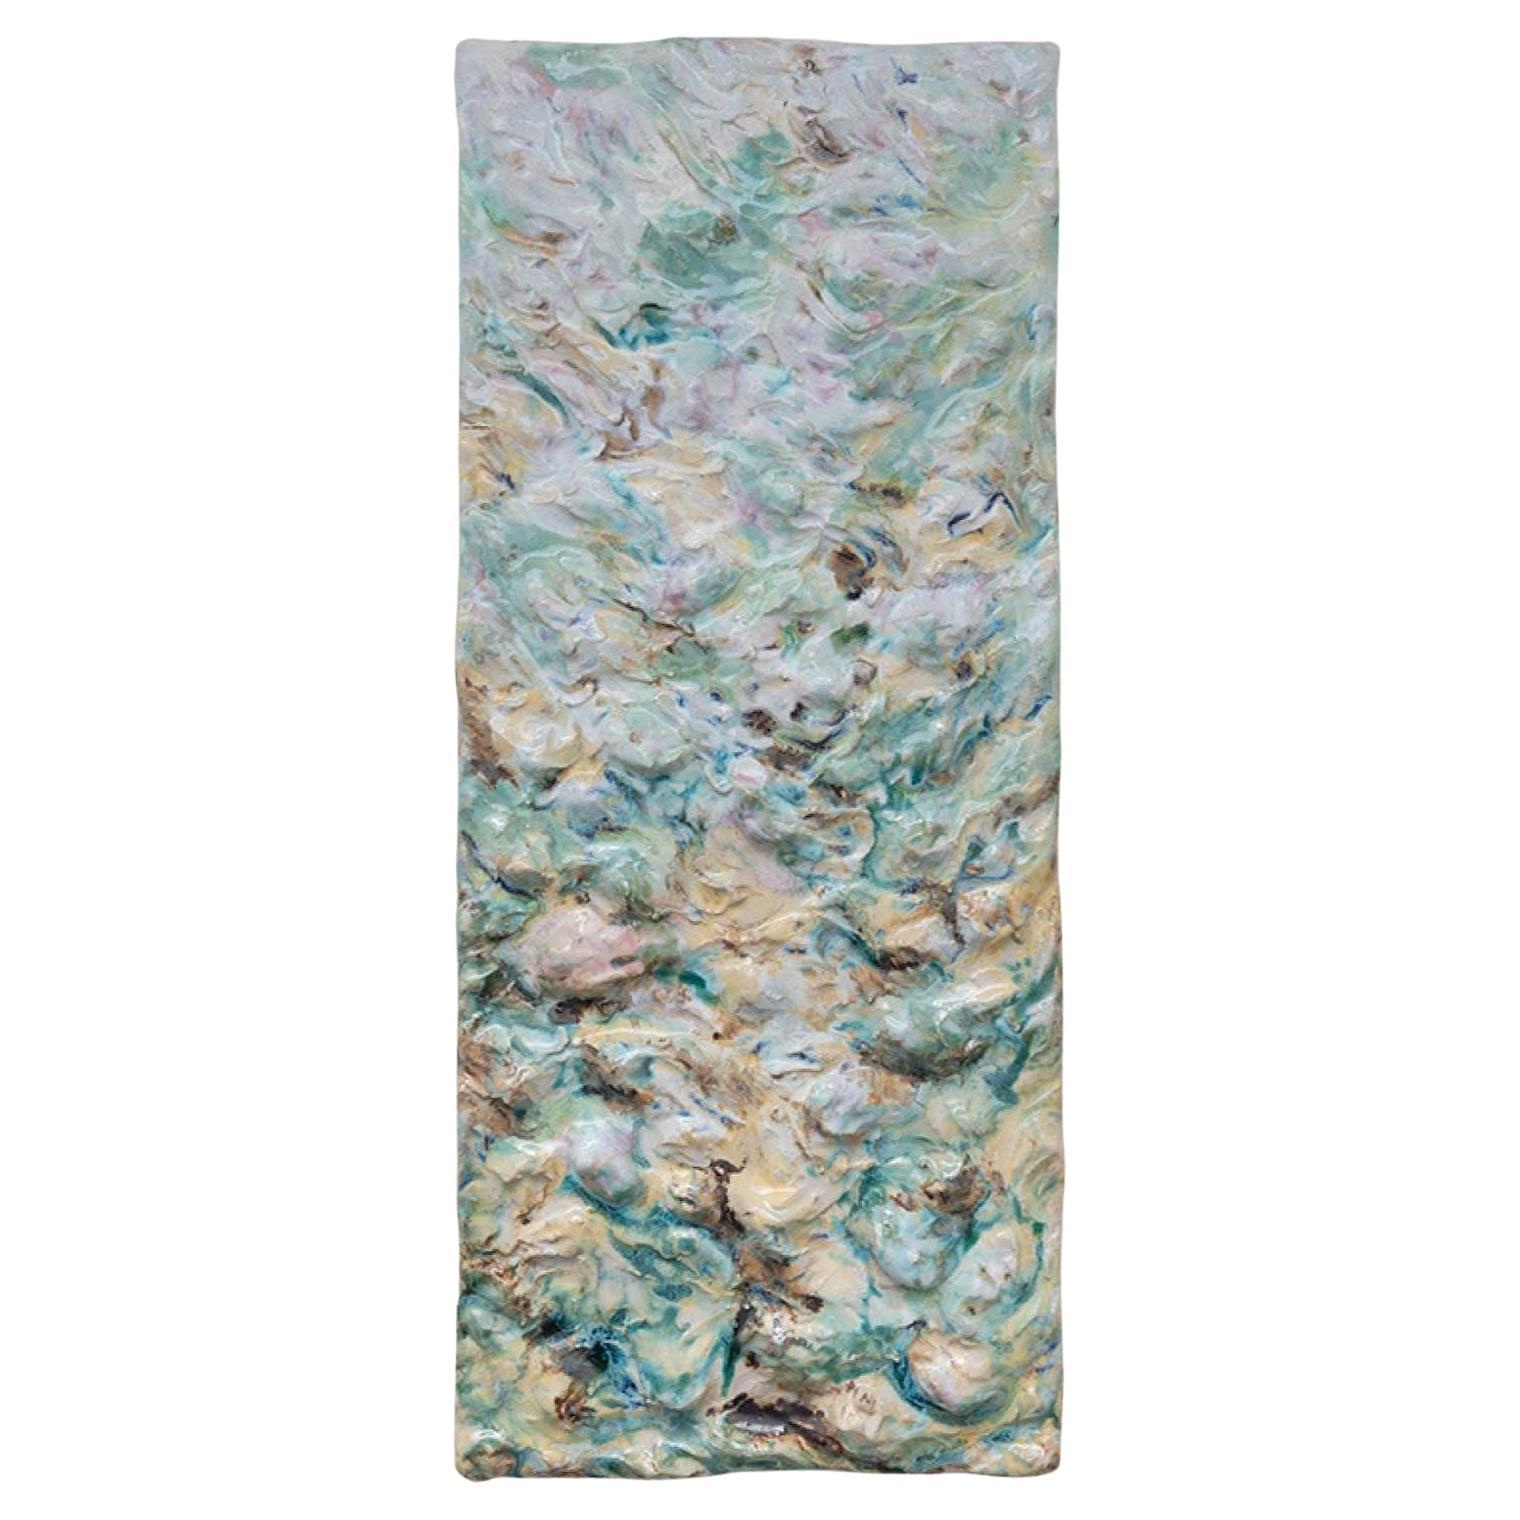 Revelate Wall Sculpture by Natasja Alers For Sale